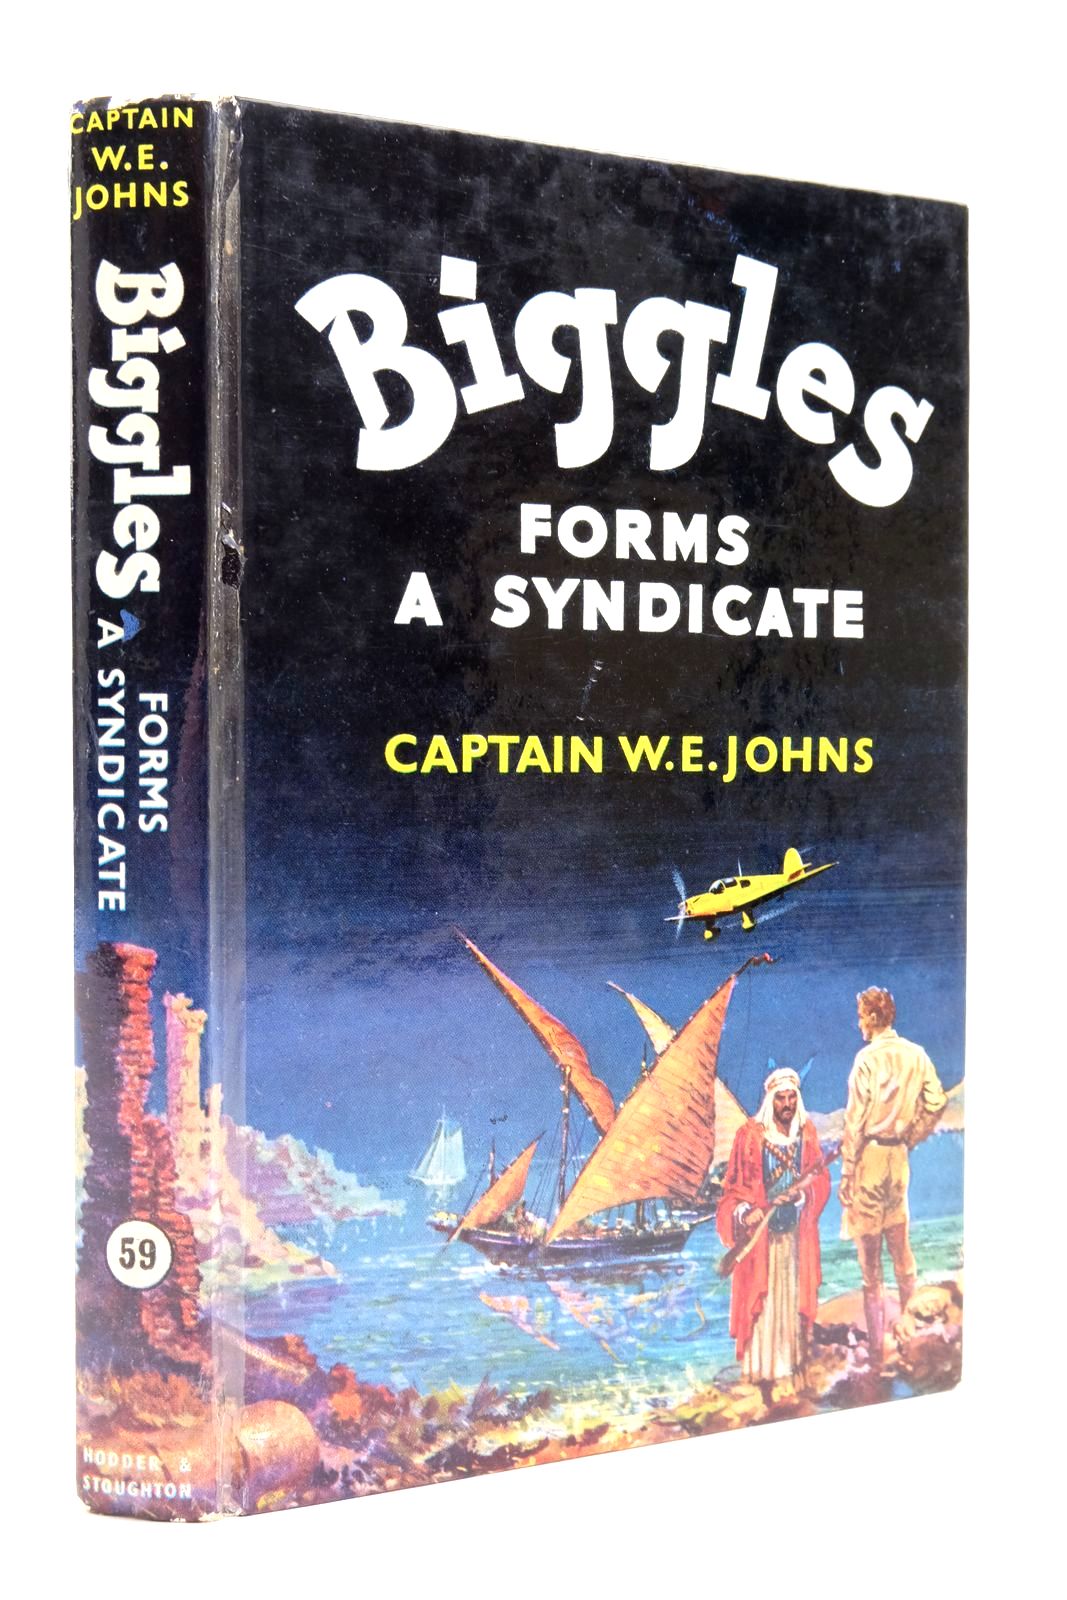 Photo of BIGGLES FORMS A SYNDICATE written by Johns, W.E. illustrated by Stead,  published by Hodder &amp; Stoughton (STOCK CODE: 2138783)  for sale by Stella & Rose's Books